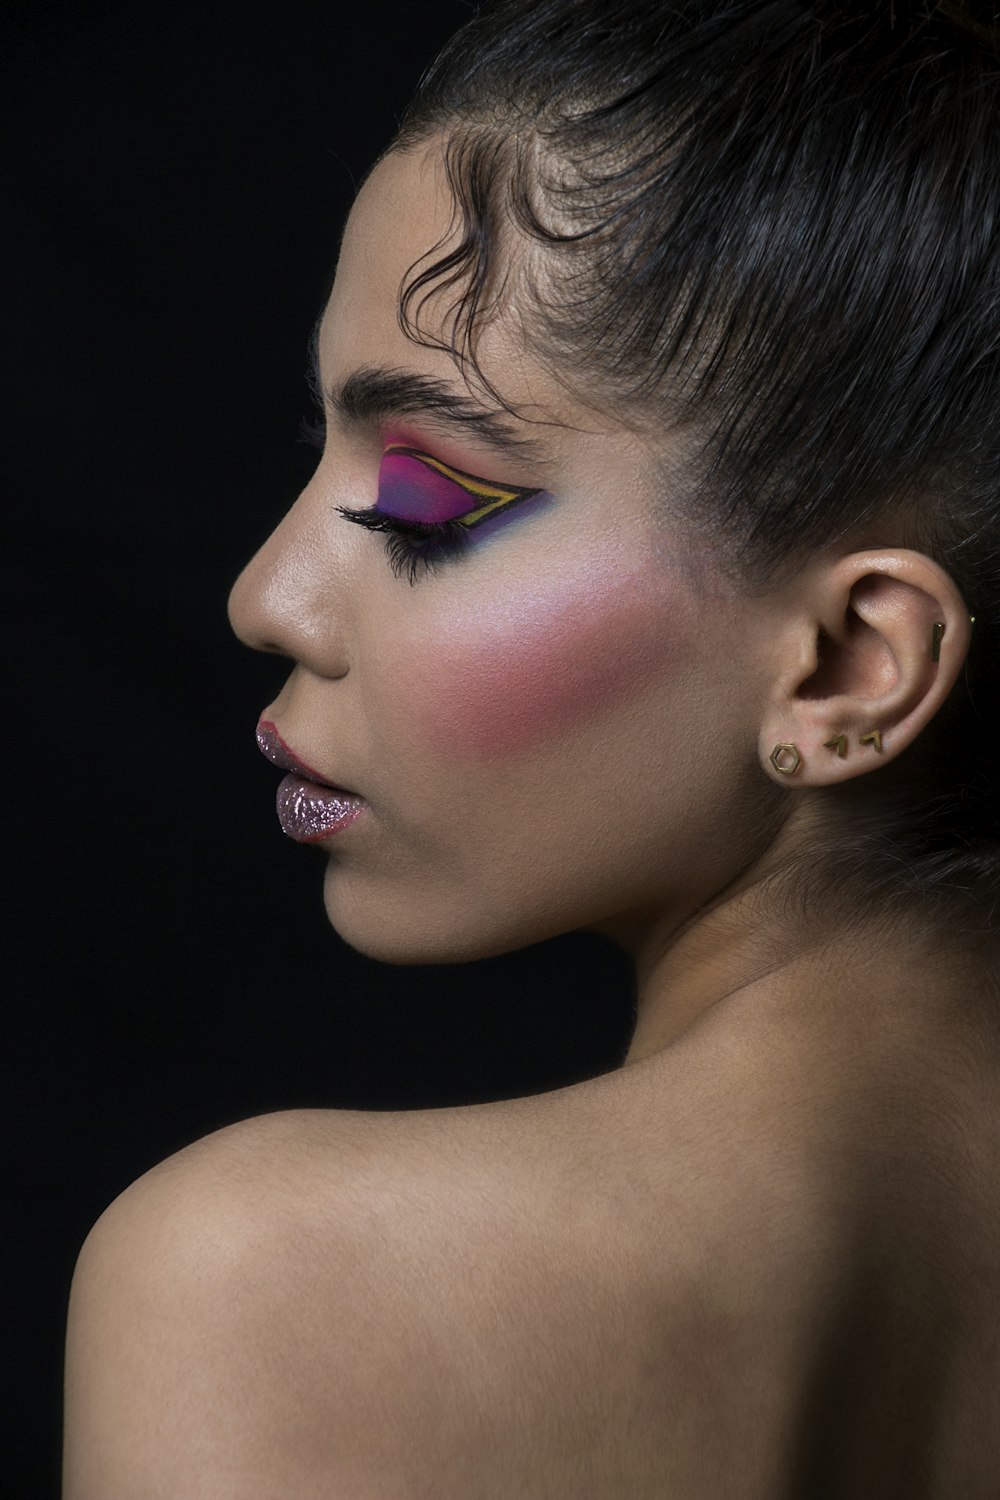 a woman with a pink and purple make up on her face